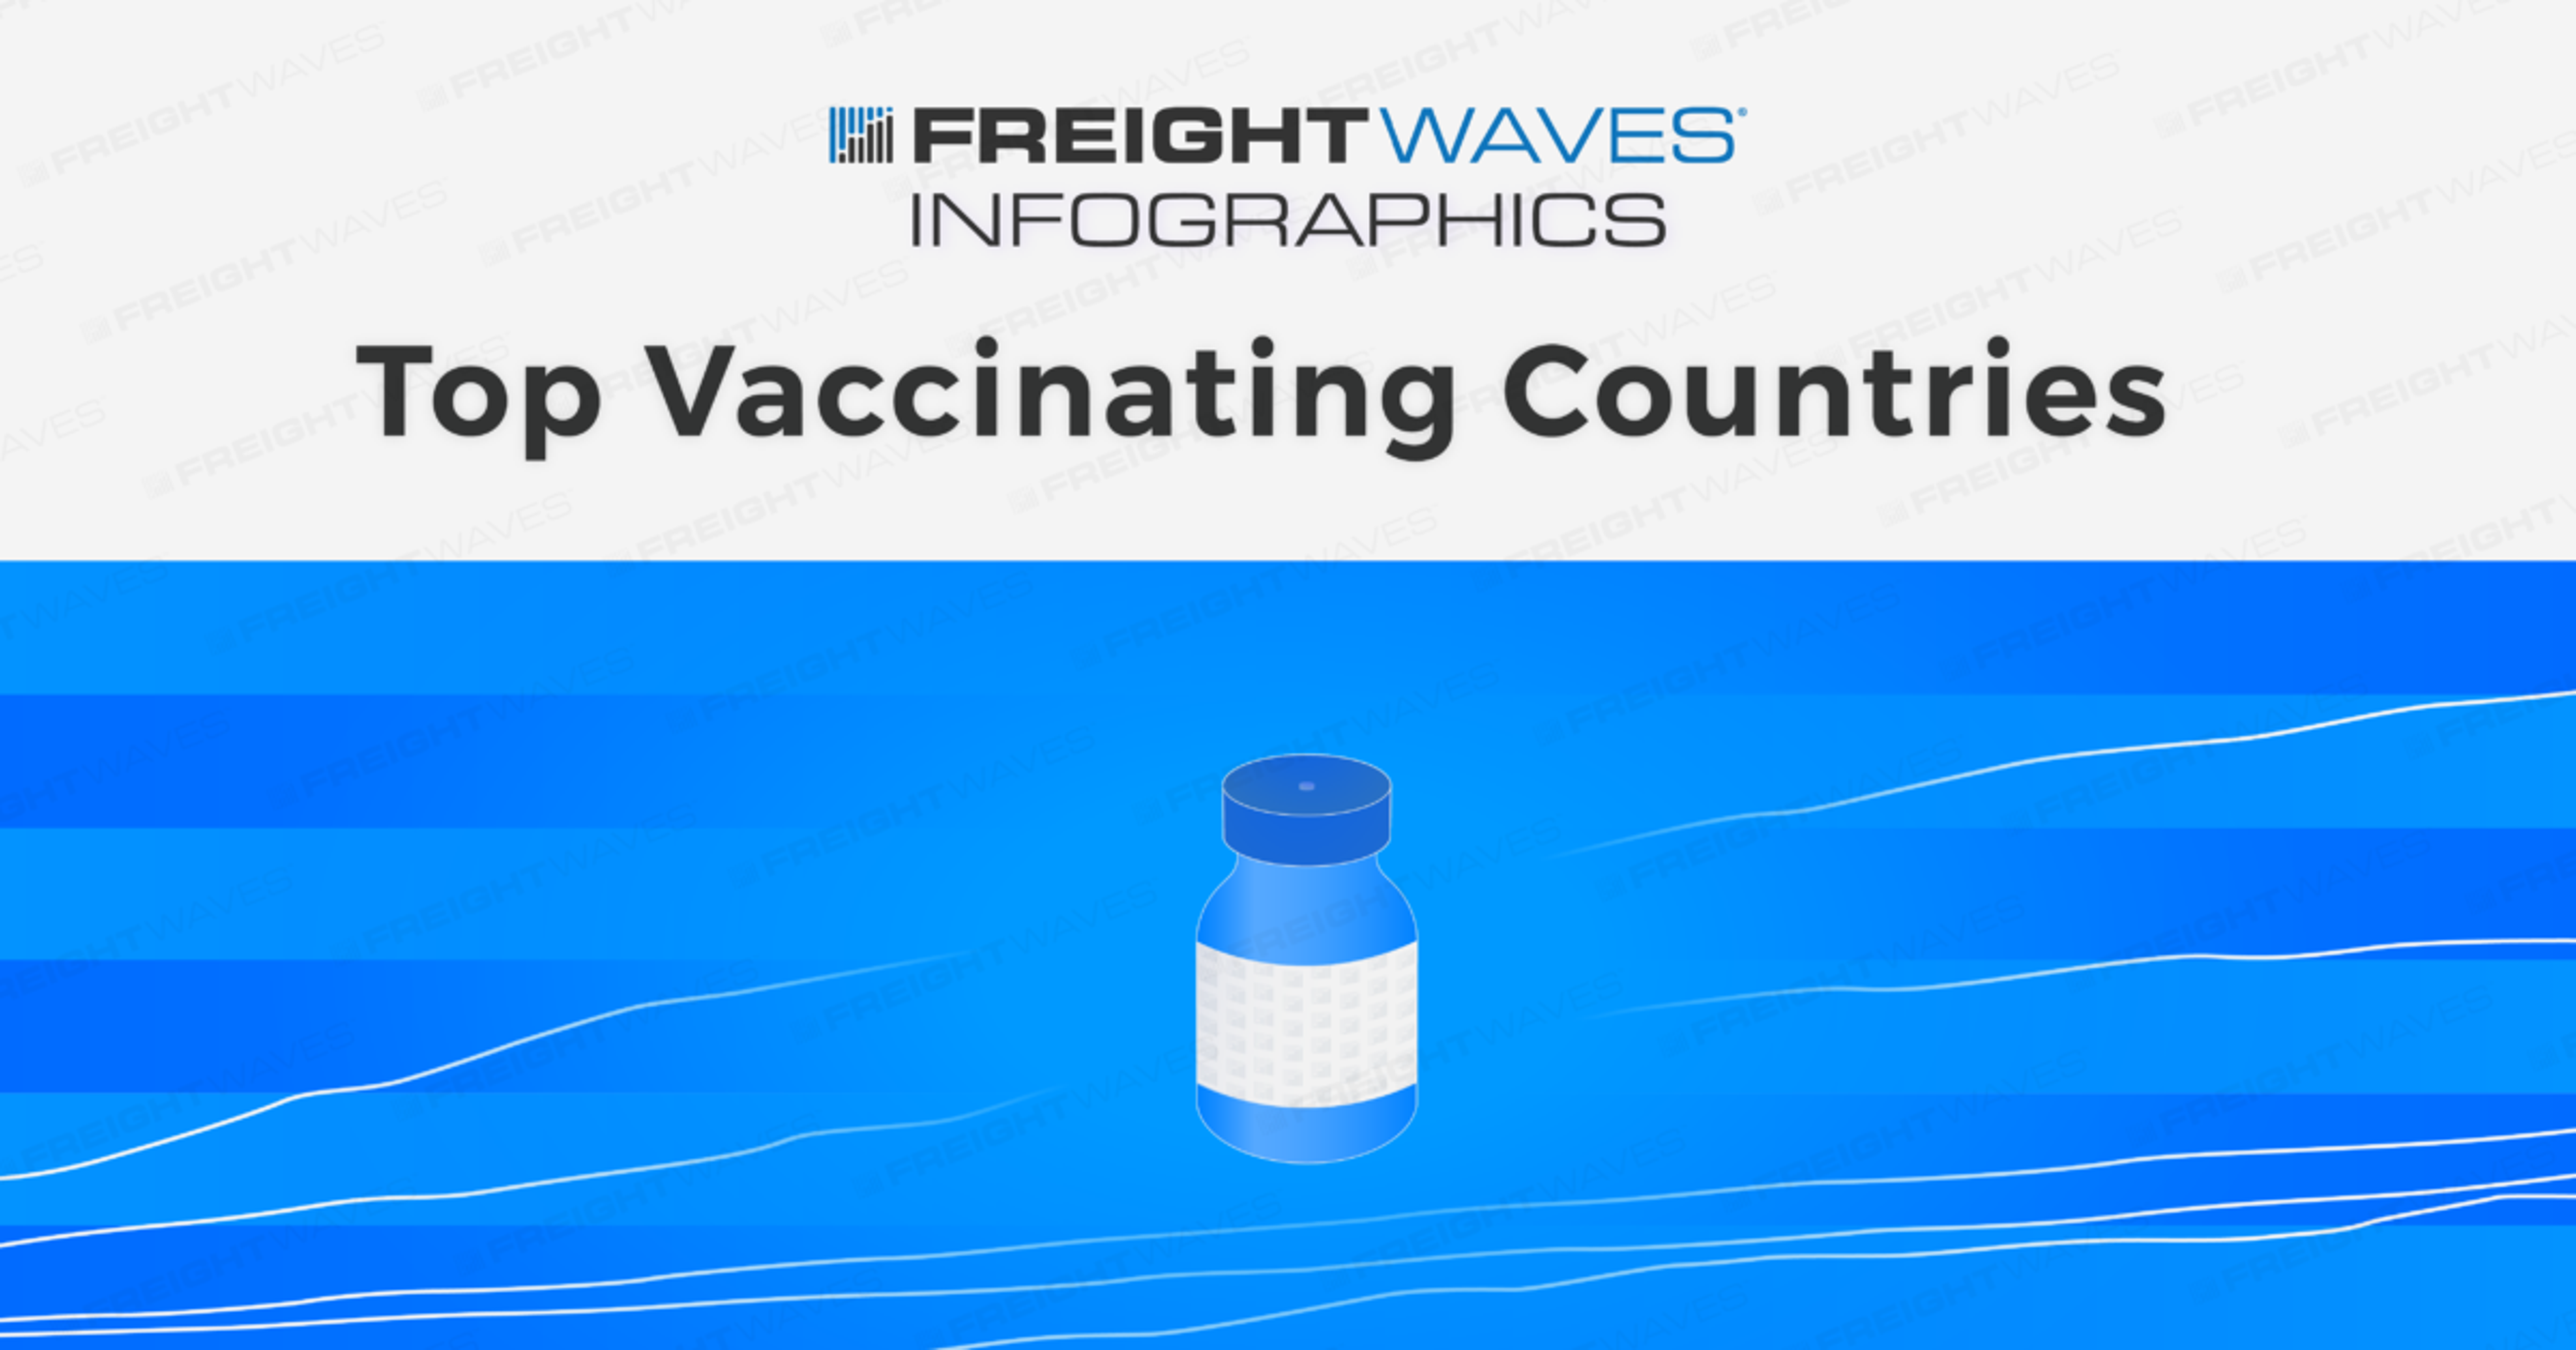 Daily Infographic: Top Vaccinating Countries